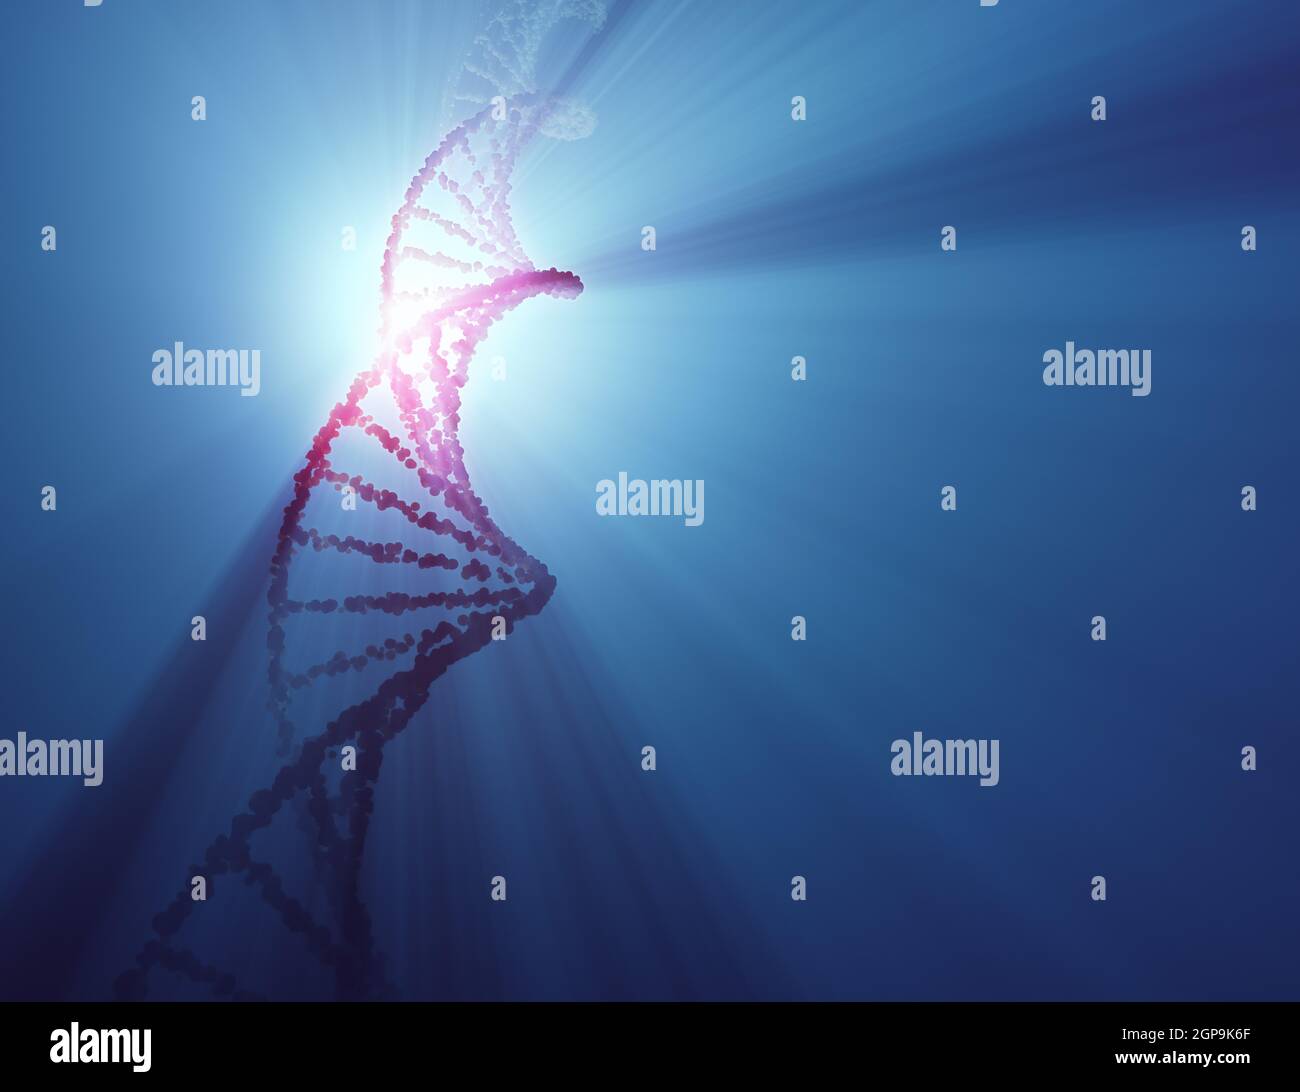 DNA molecule with backlight. Genetic code, helical molecules. Clipping path included. Stock Photo